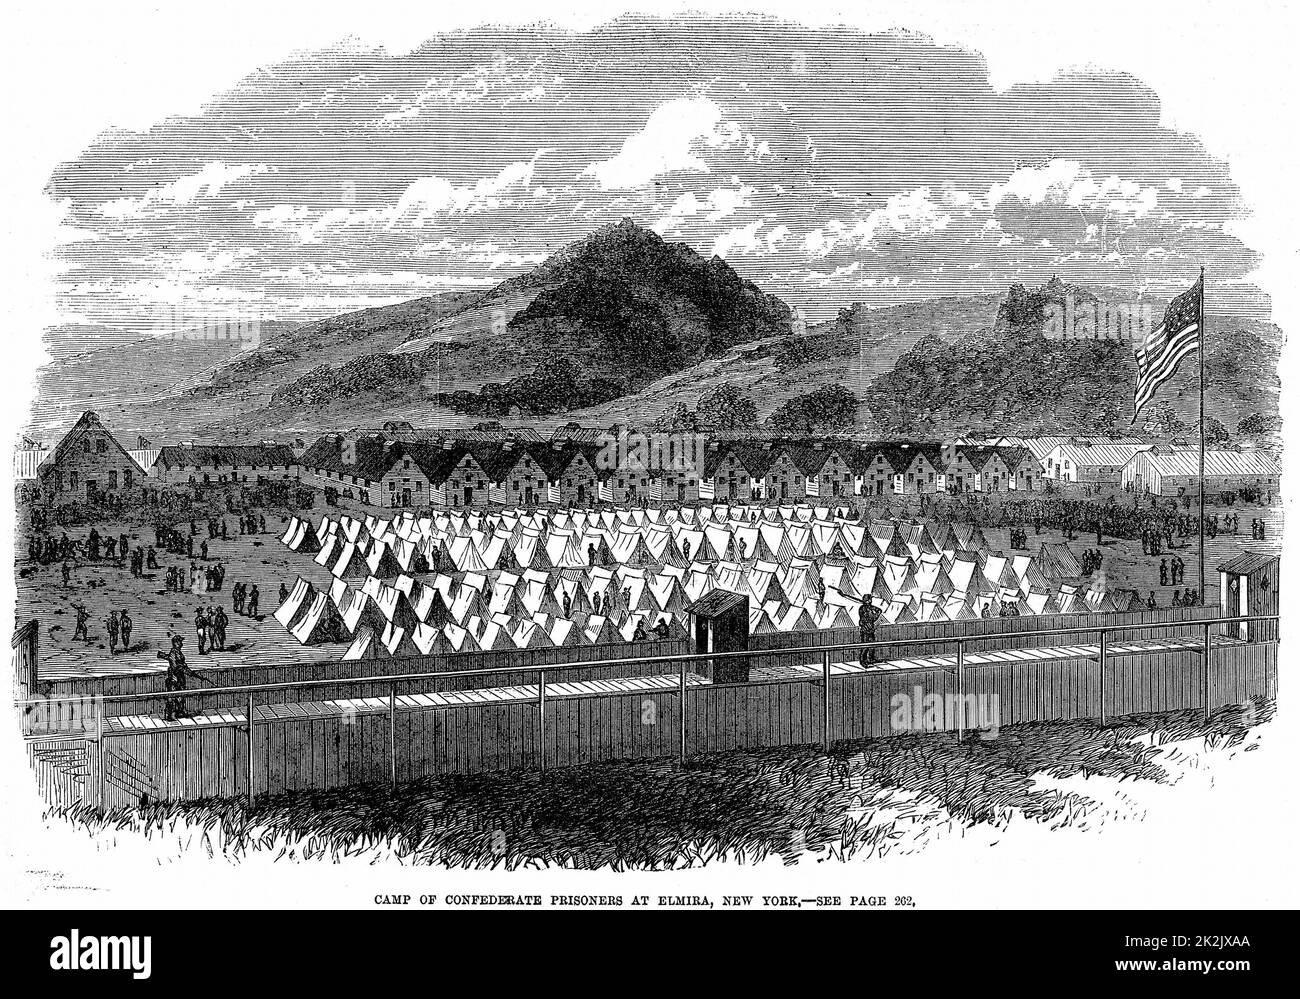 American Civil War 1861-1865: Confederate (southern) prisoners in Federal (northern) prison camp at Elmira, New York Stare. About 10,000 men held in huts and under canvas in enclosure of about 20 acres .From 'The Illustrated London News', March 1865. Wood Stock Photo